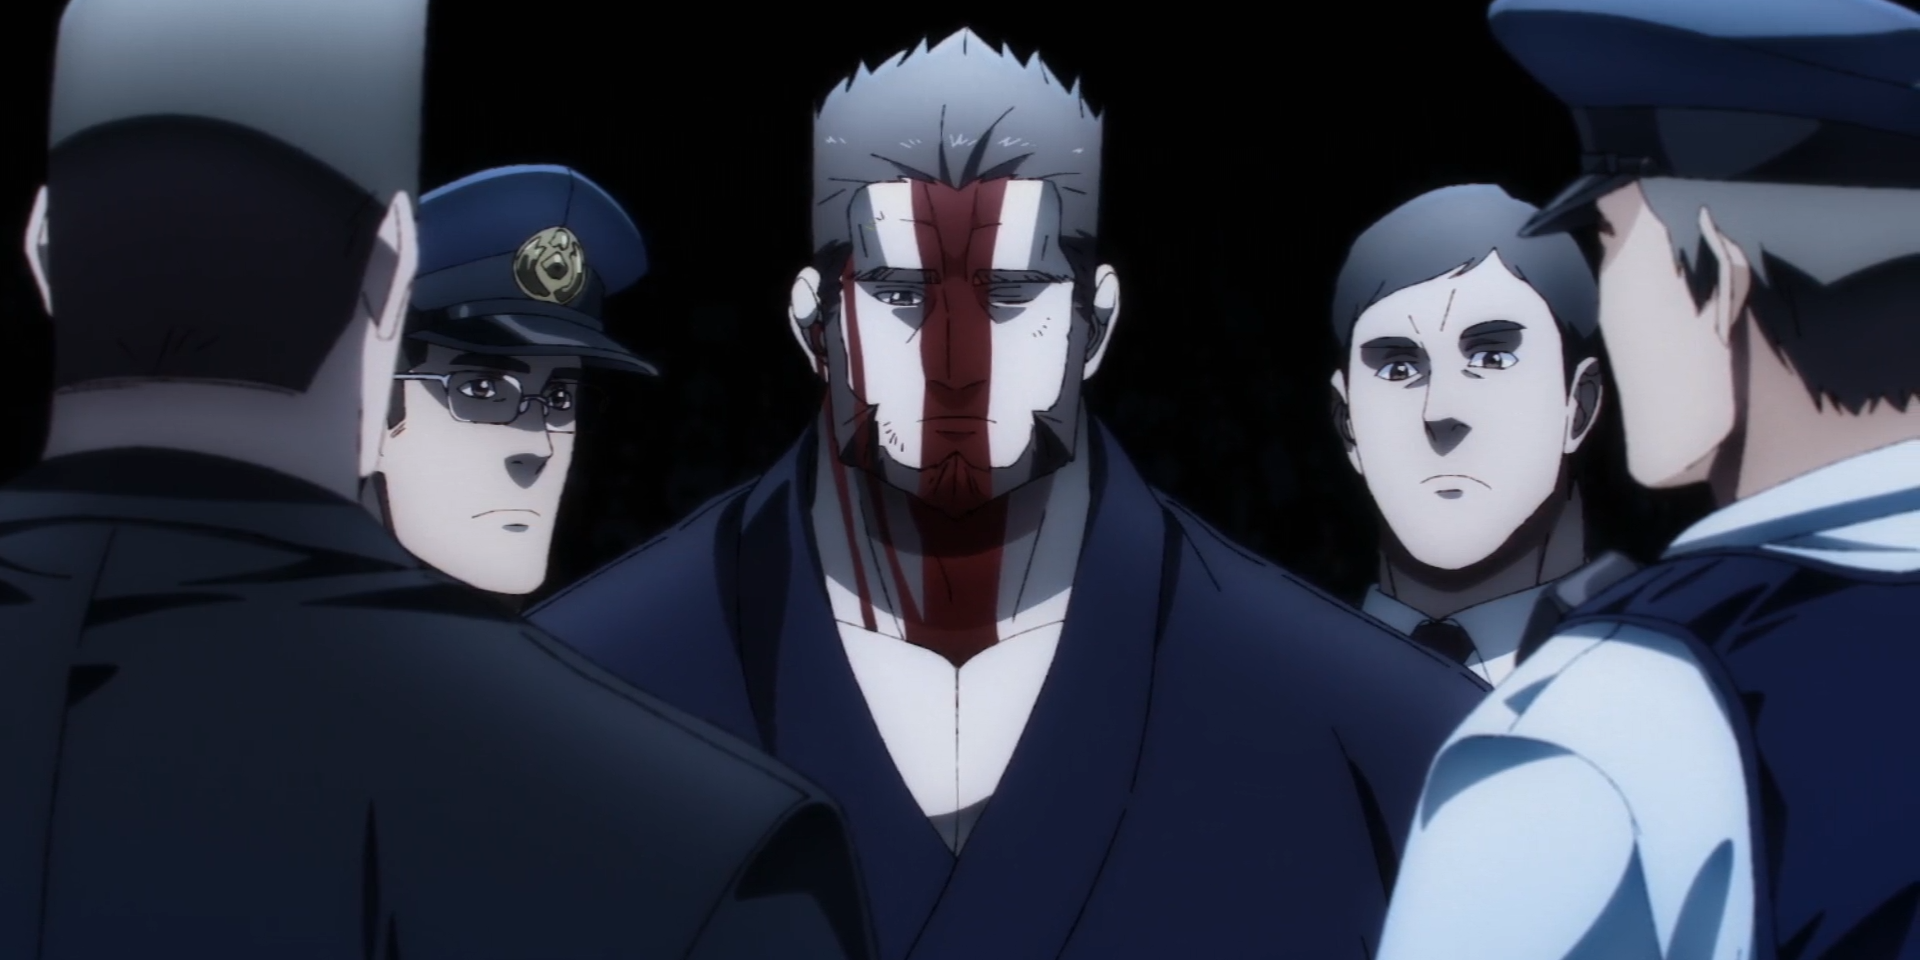 Juzo, face covered in blood, stands exhausted but accepting of his face as he his surrounded by police officers.